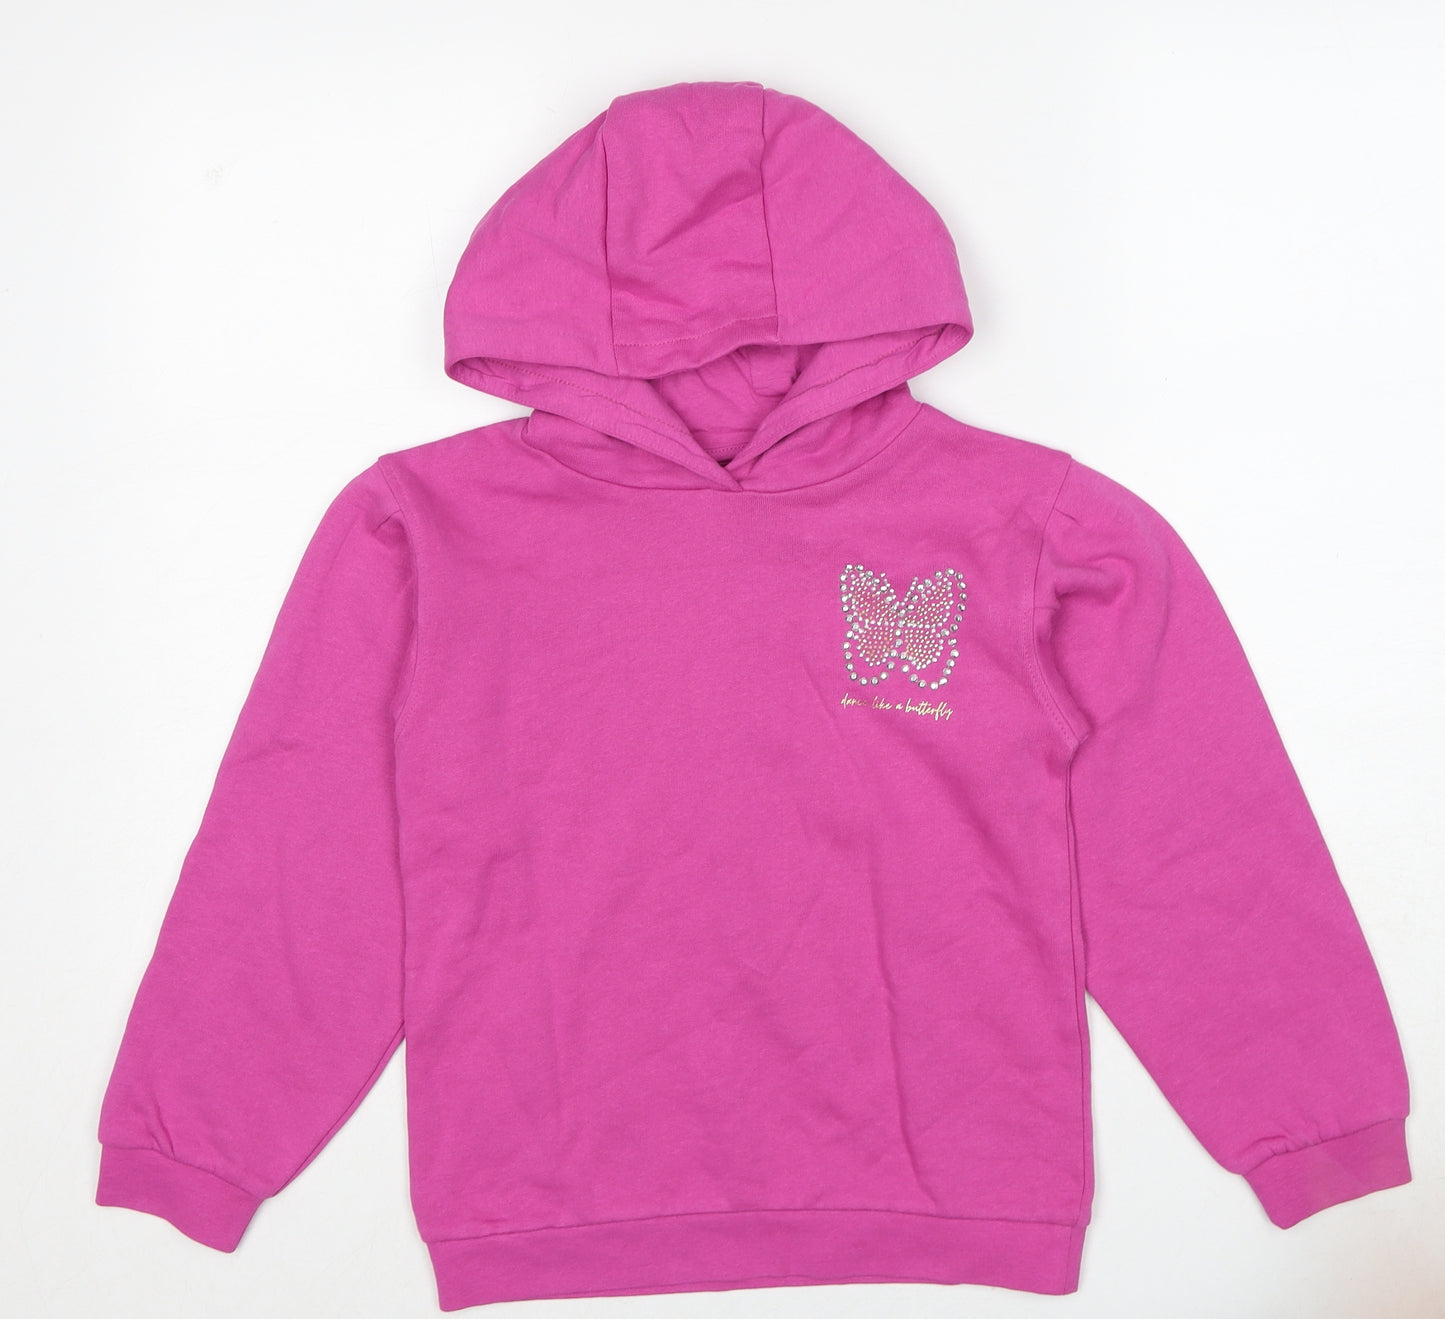 John Lewis Girls Pink Cotton Pullover Hoodie Size 9 Years Pullover - Dance Like A Butterfly